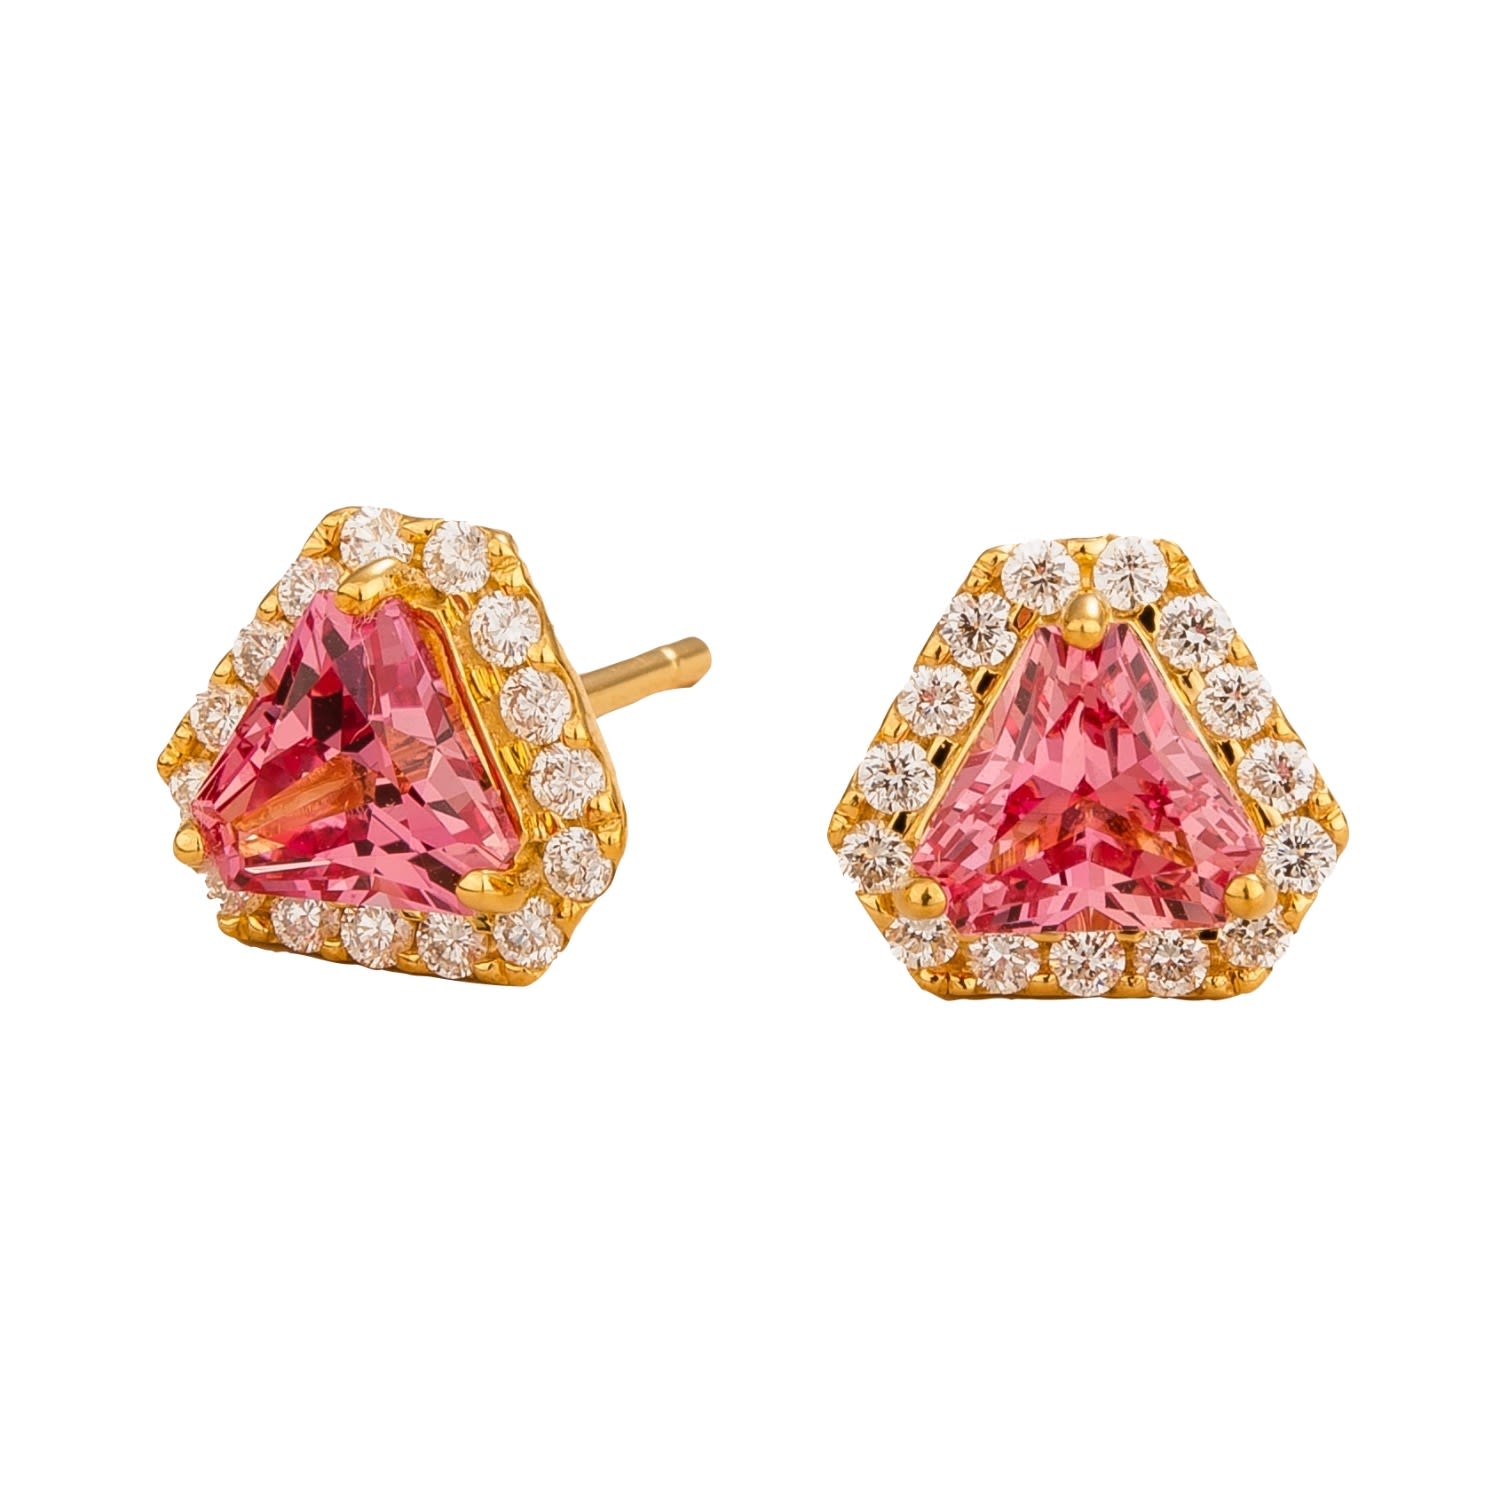 Women’s Pink / Purple / Yellow Diana Gold Earrings With Padparadscha Sapphires And Diamonds Juvetti